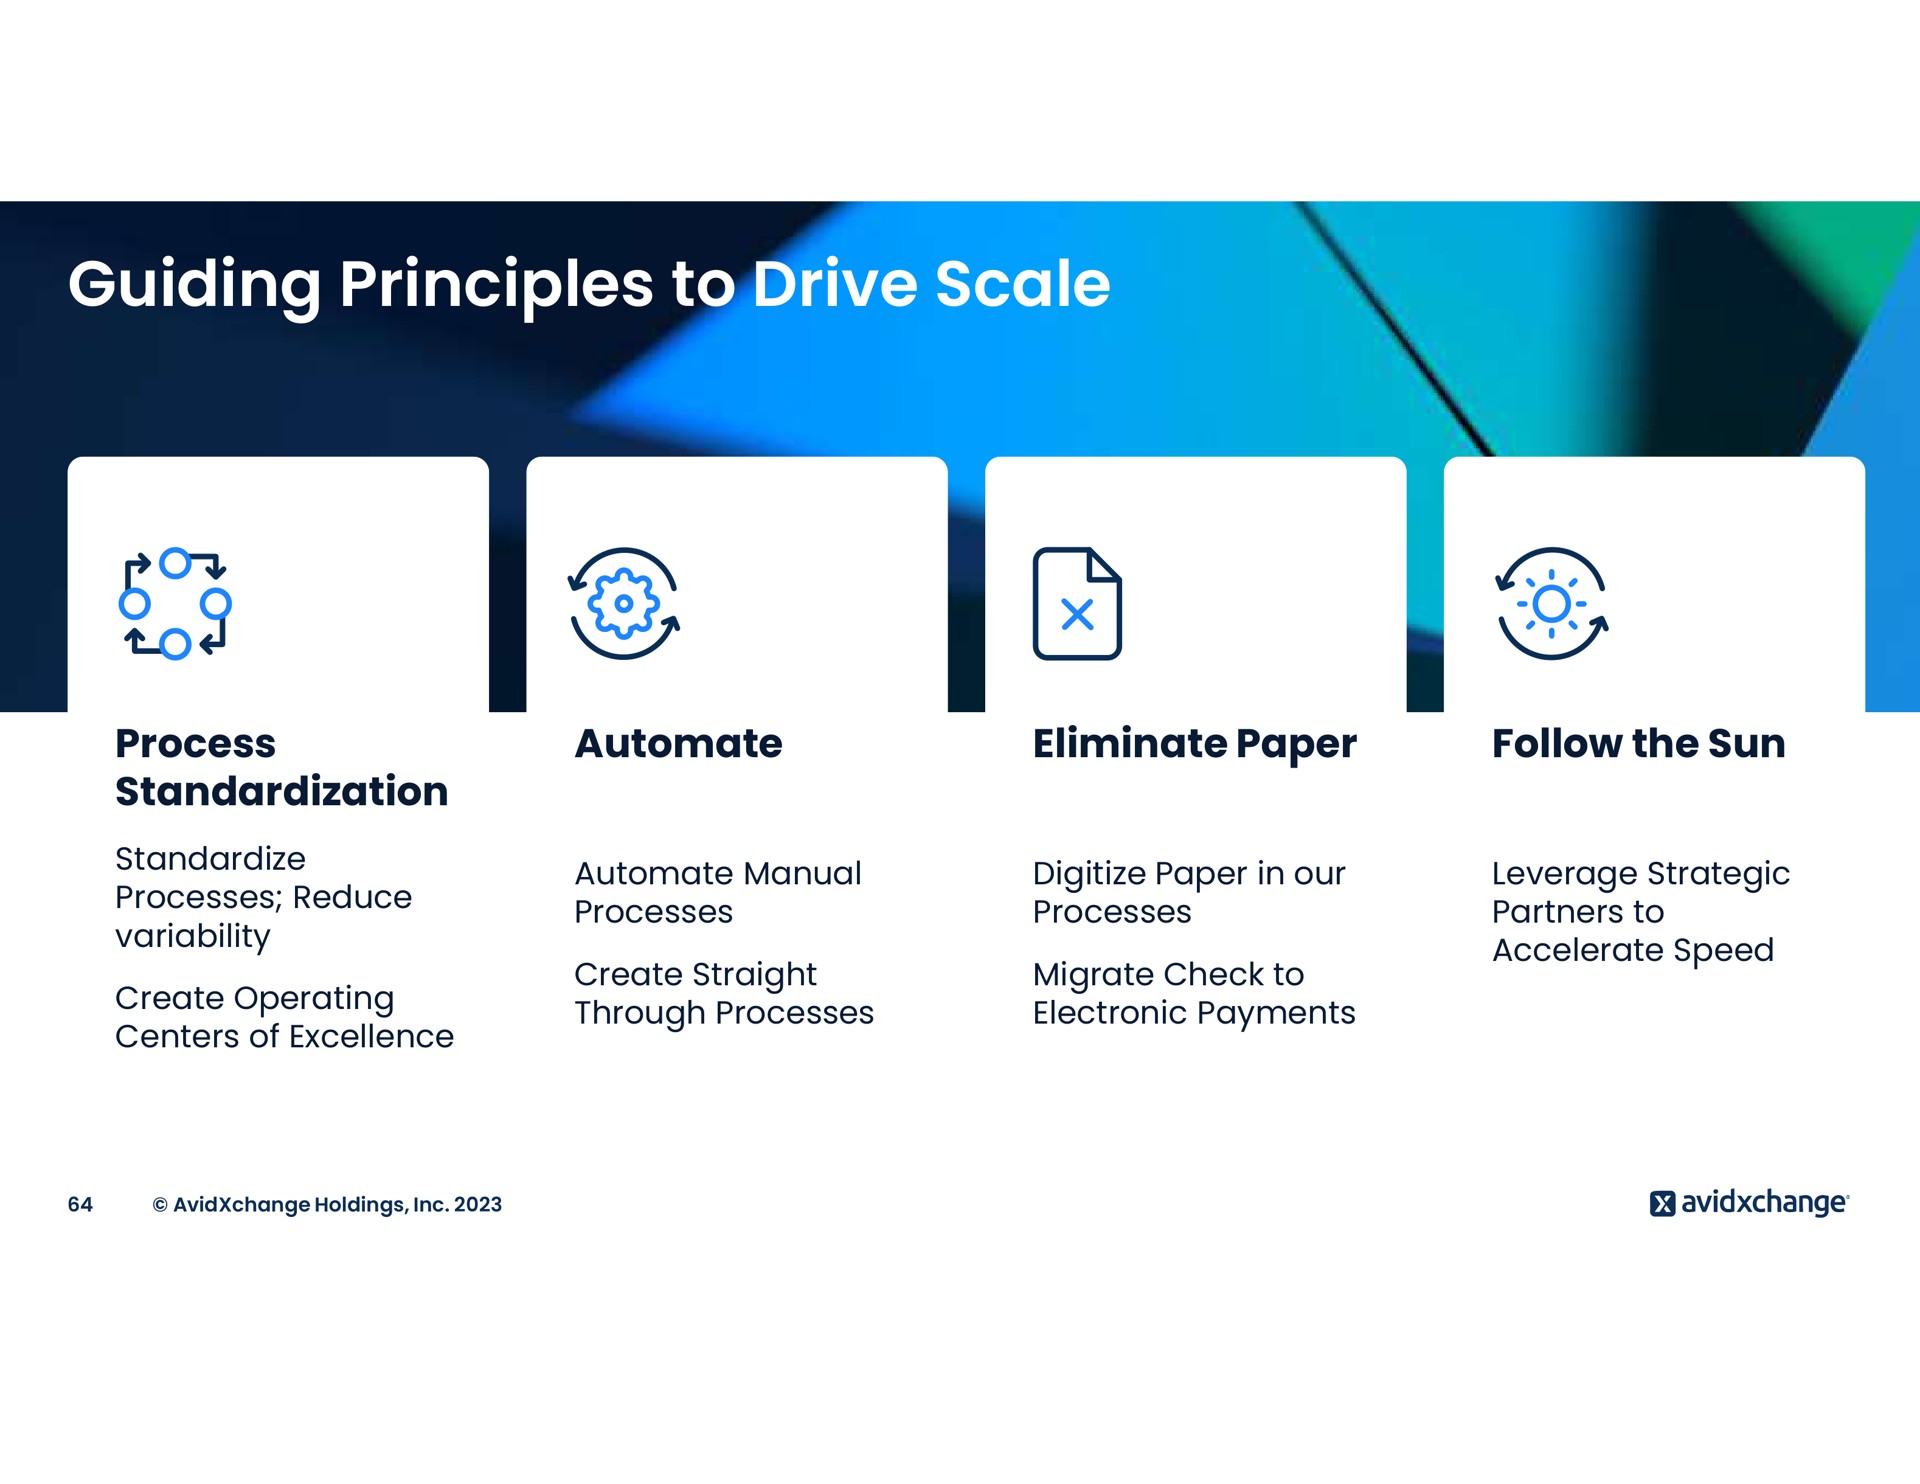 guiding principles to drive scale | AvidXchange